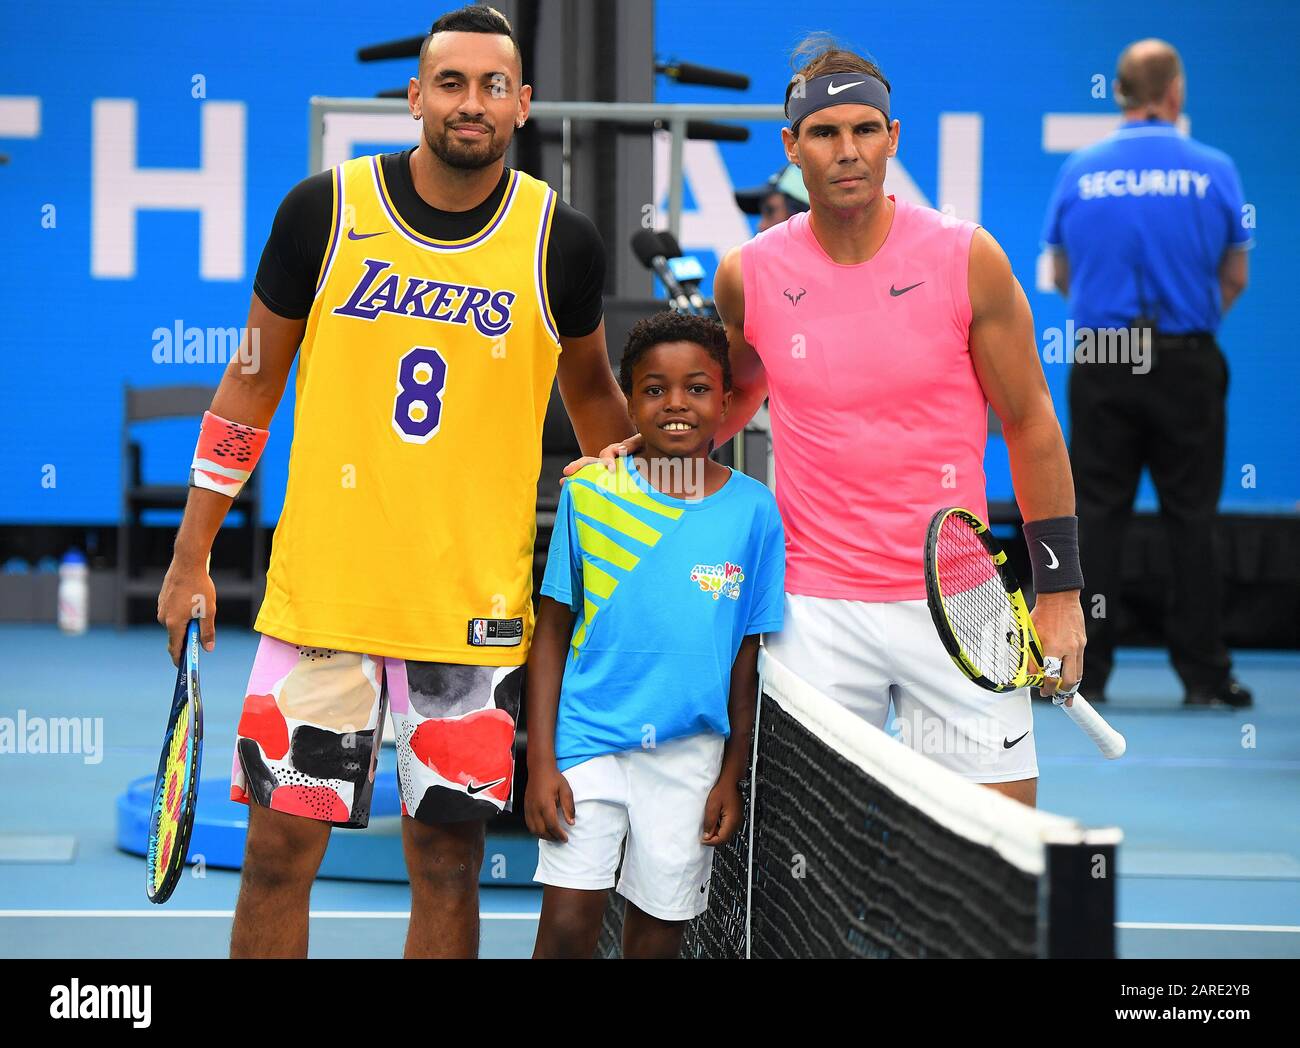 Melbourne Park Australian Open Day 8 27/01/20 Nick Kyrgios (AUS) Rafa Nadal (ESP) fourth round match Kyrgios arrives on court wearing an LA Lakers shirt in respect of hoops legend Kobe Bryant